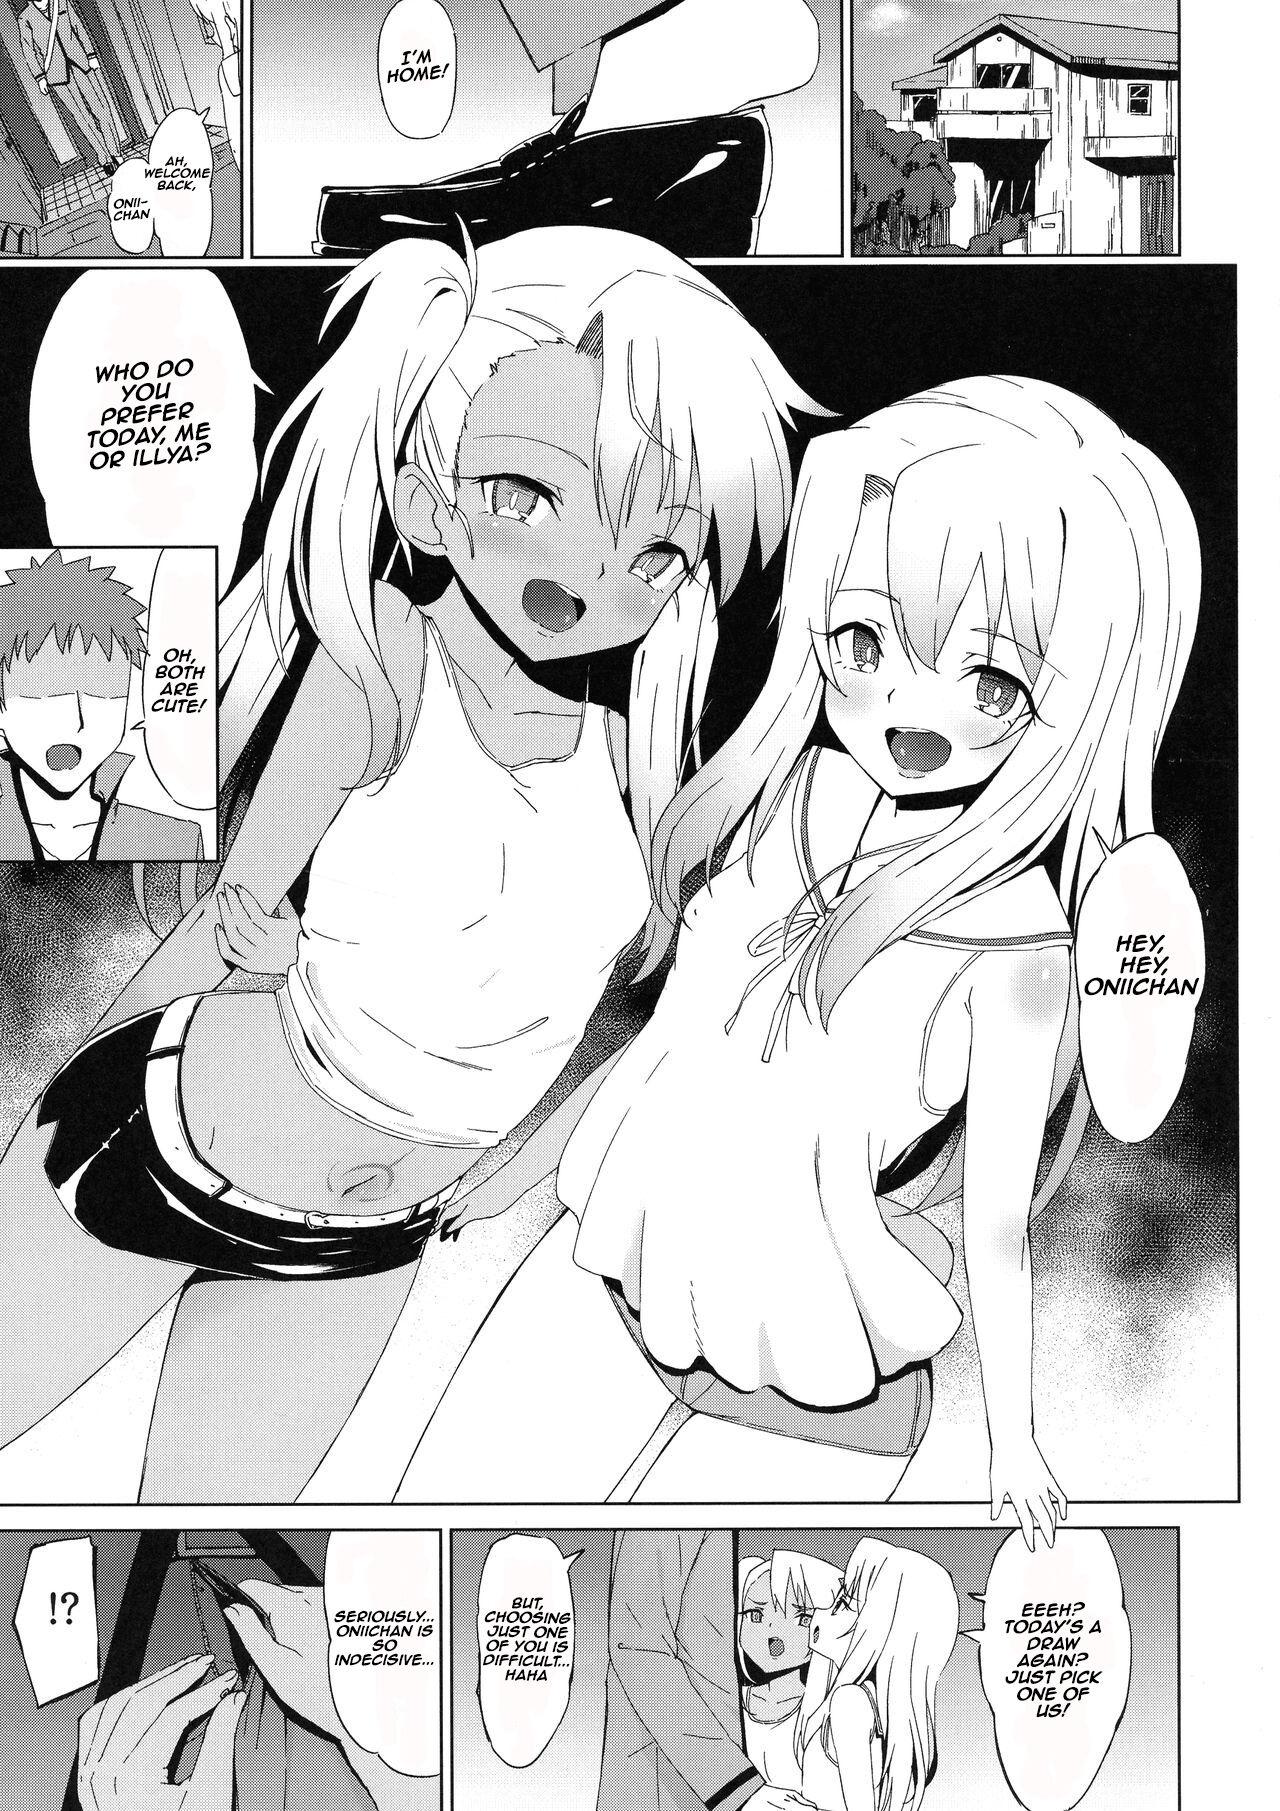 Vagina Oshiete Onii-chan - Fate kaleid liner prisma illya Candid - Page 3